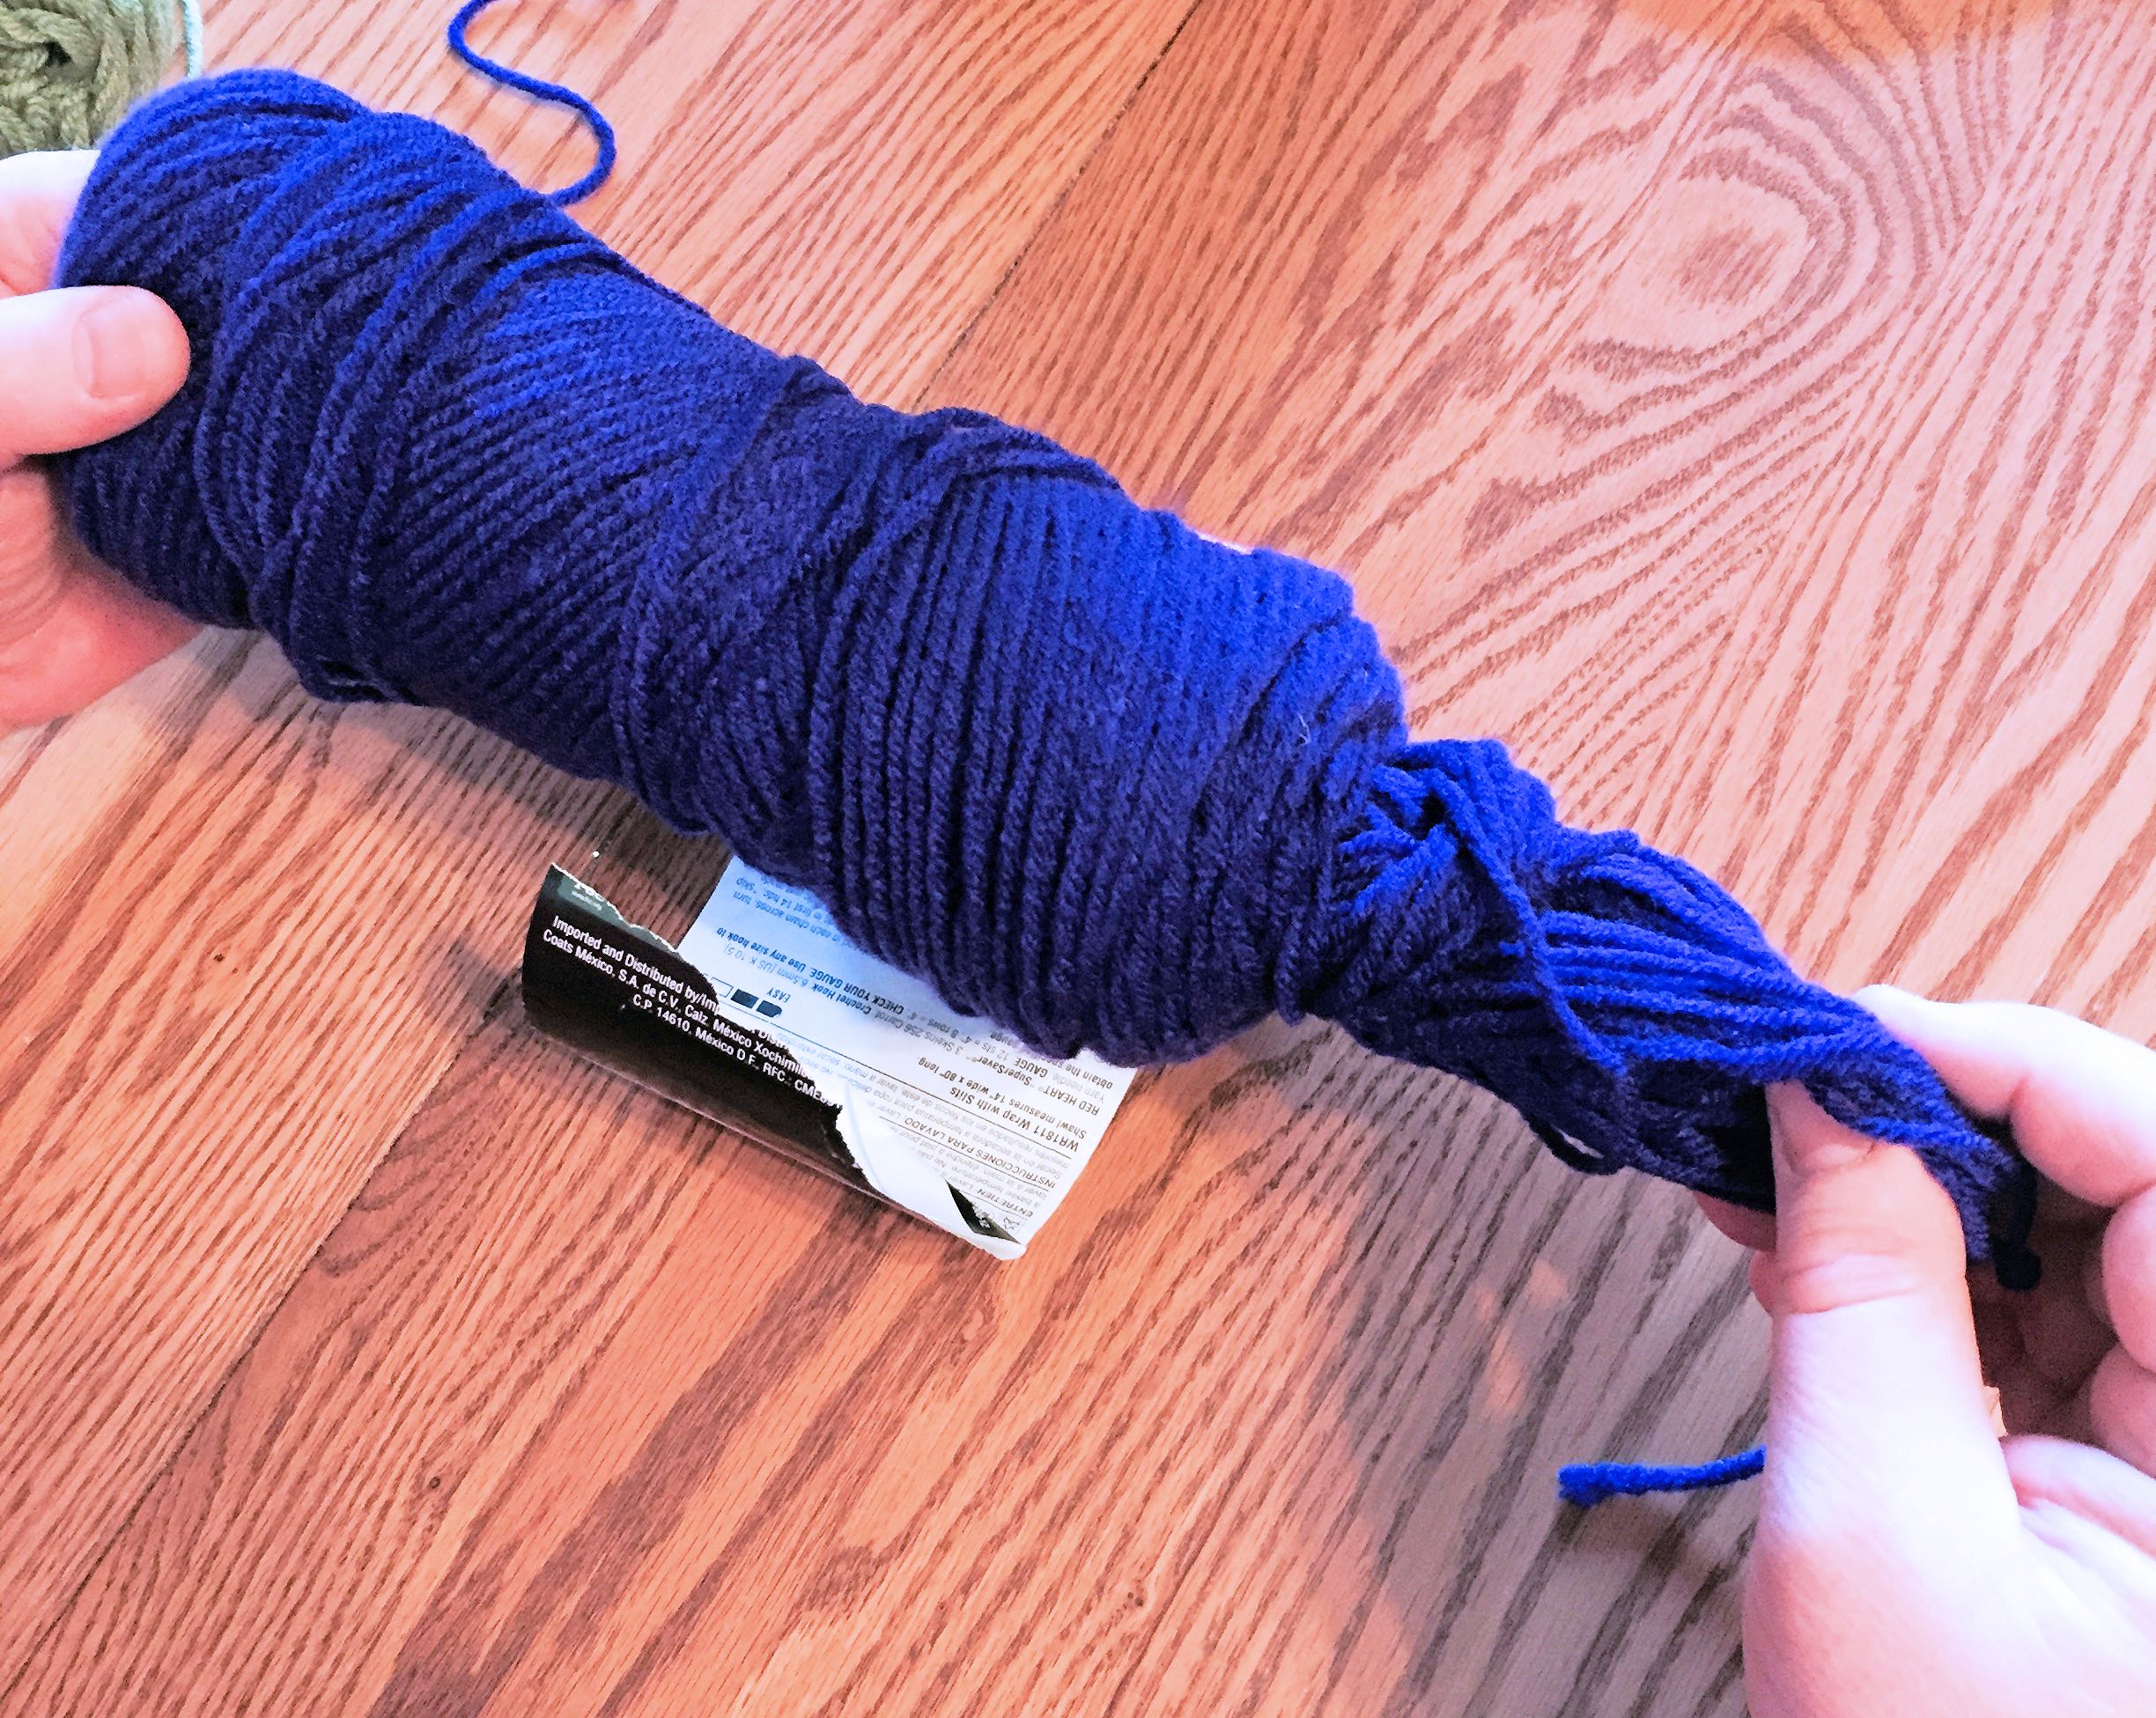 One Trick to Turn Any Yarn Into a Center-Pull Ball